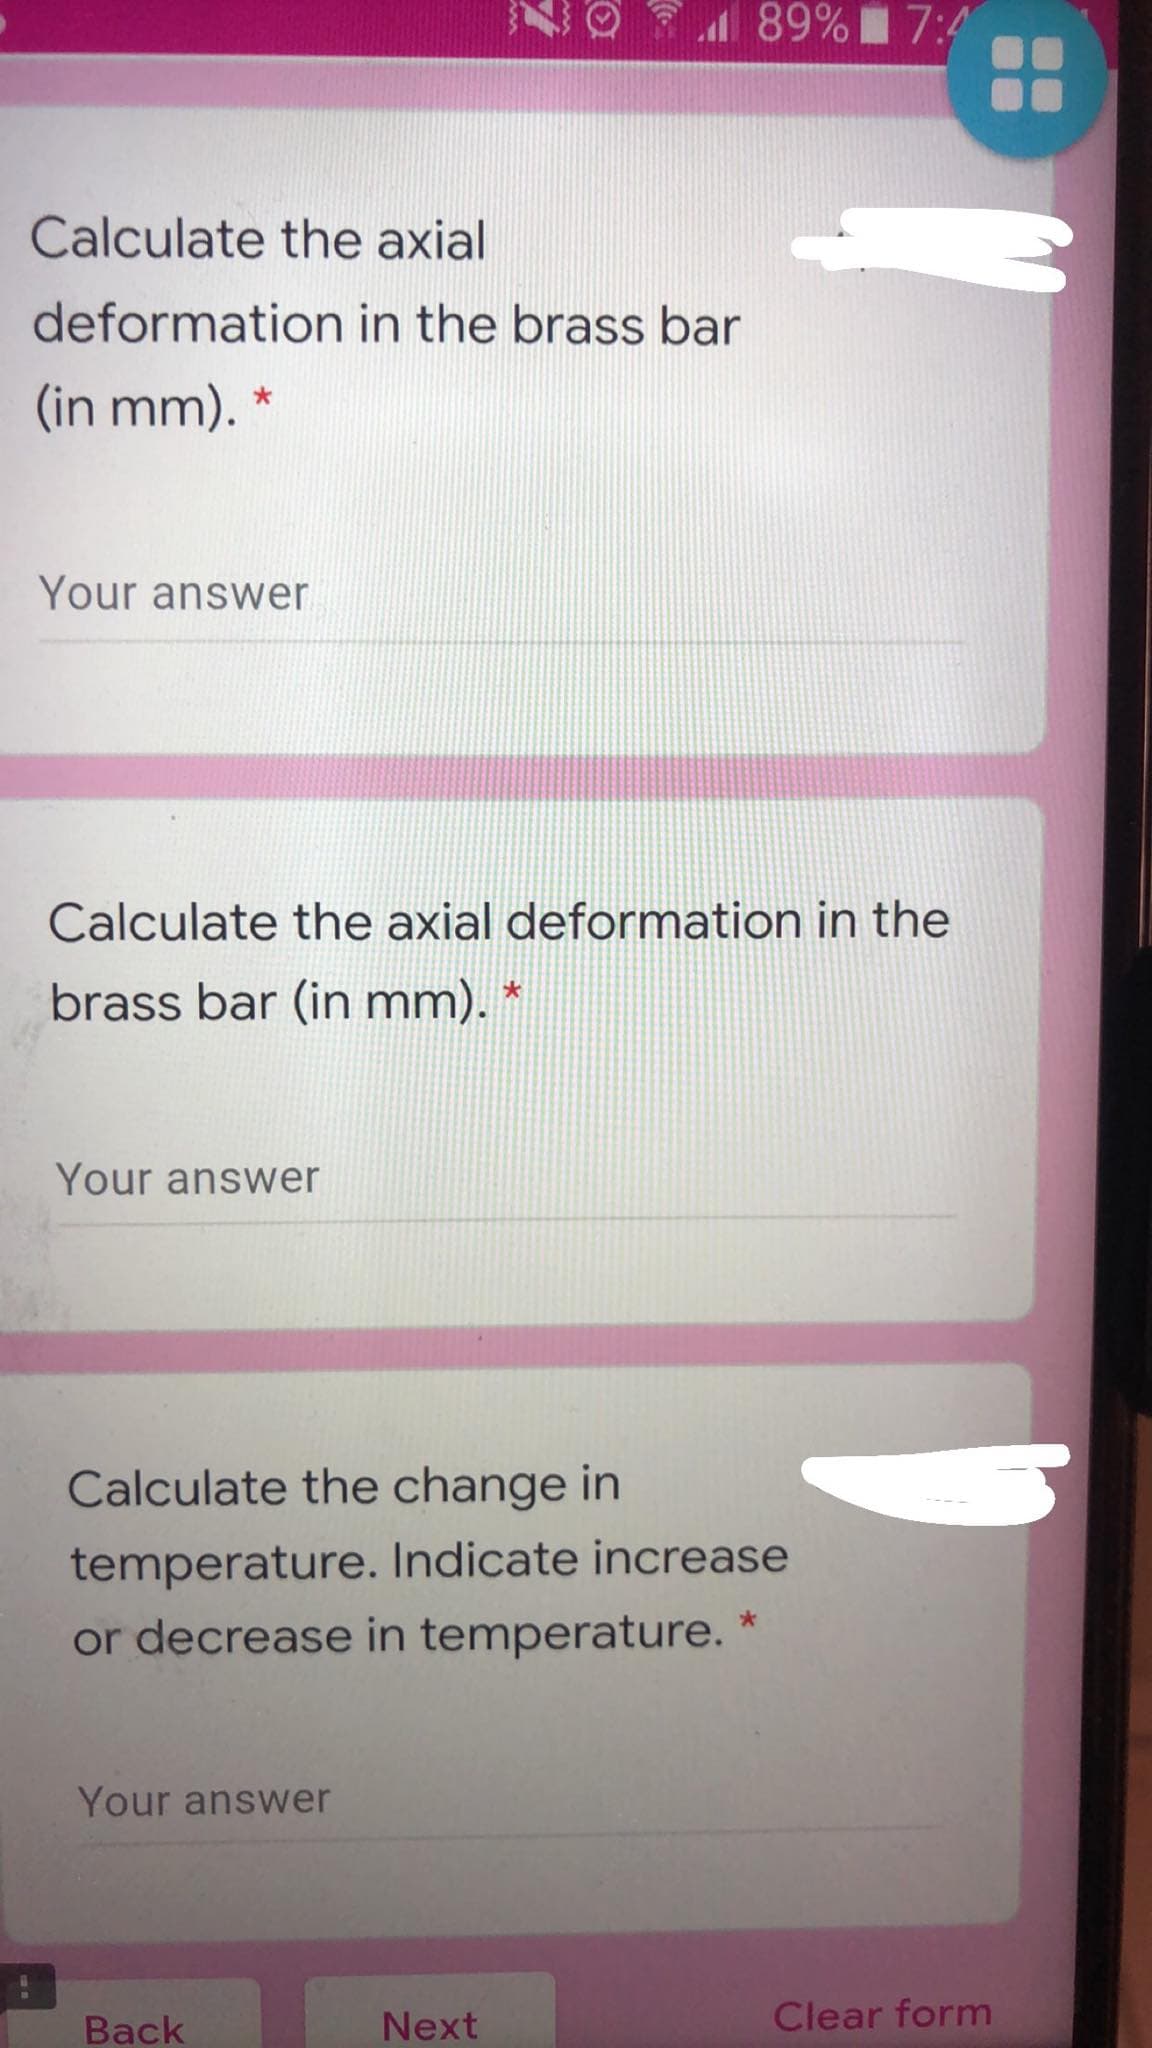 89% 7:4
Calculate the axial
deformation in the brass bar
(in mm). *
Your answer
Calculate the axial deformation in the
brass bar (in mm). *
Your answer
Calculate the change in
temperature. Indicate increase
or decrease in temperature. "
Your answer
Back
Next
Clear form
